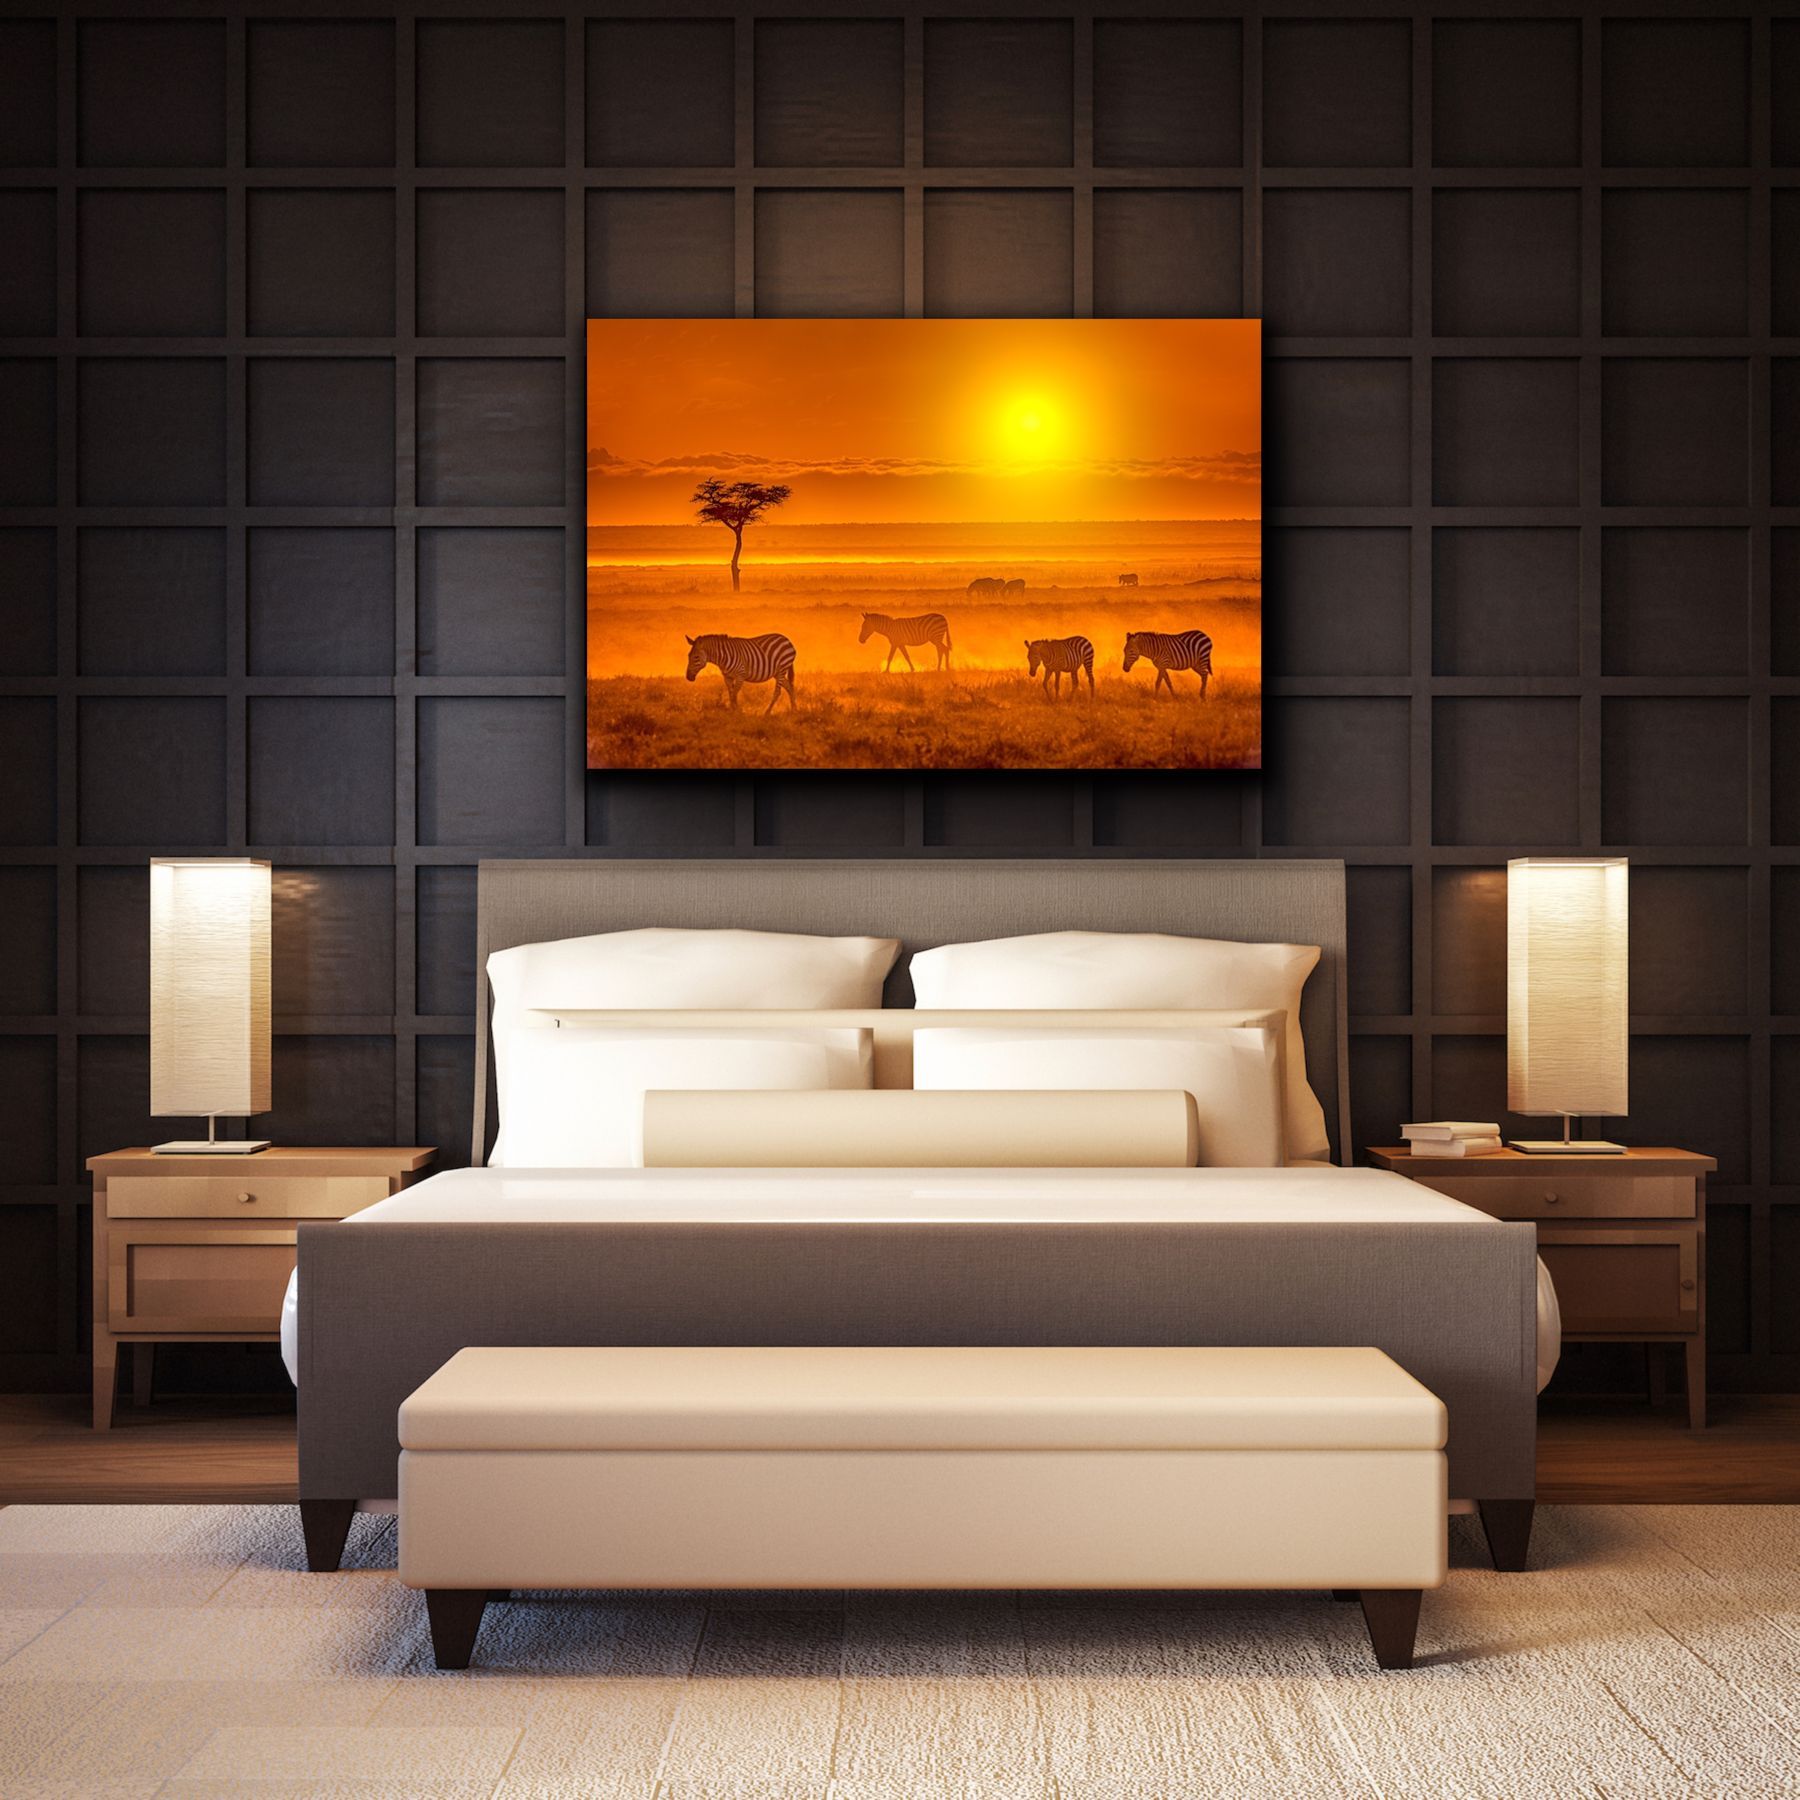 Example of image #Amboseli Sunset D854586 in a bedroom of a modern home